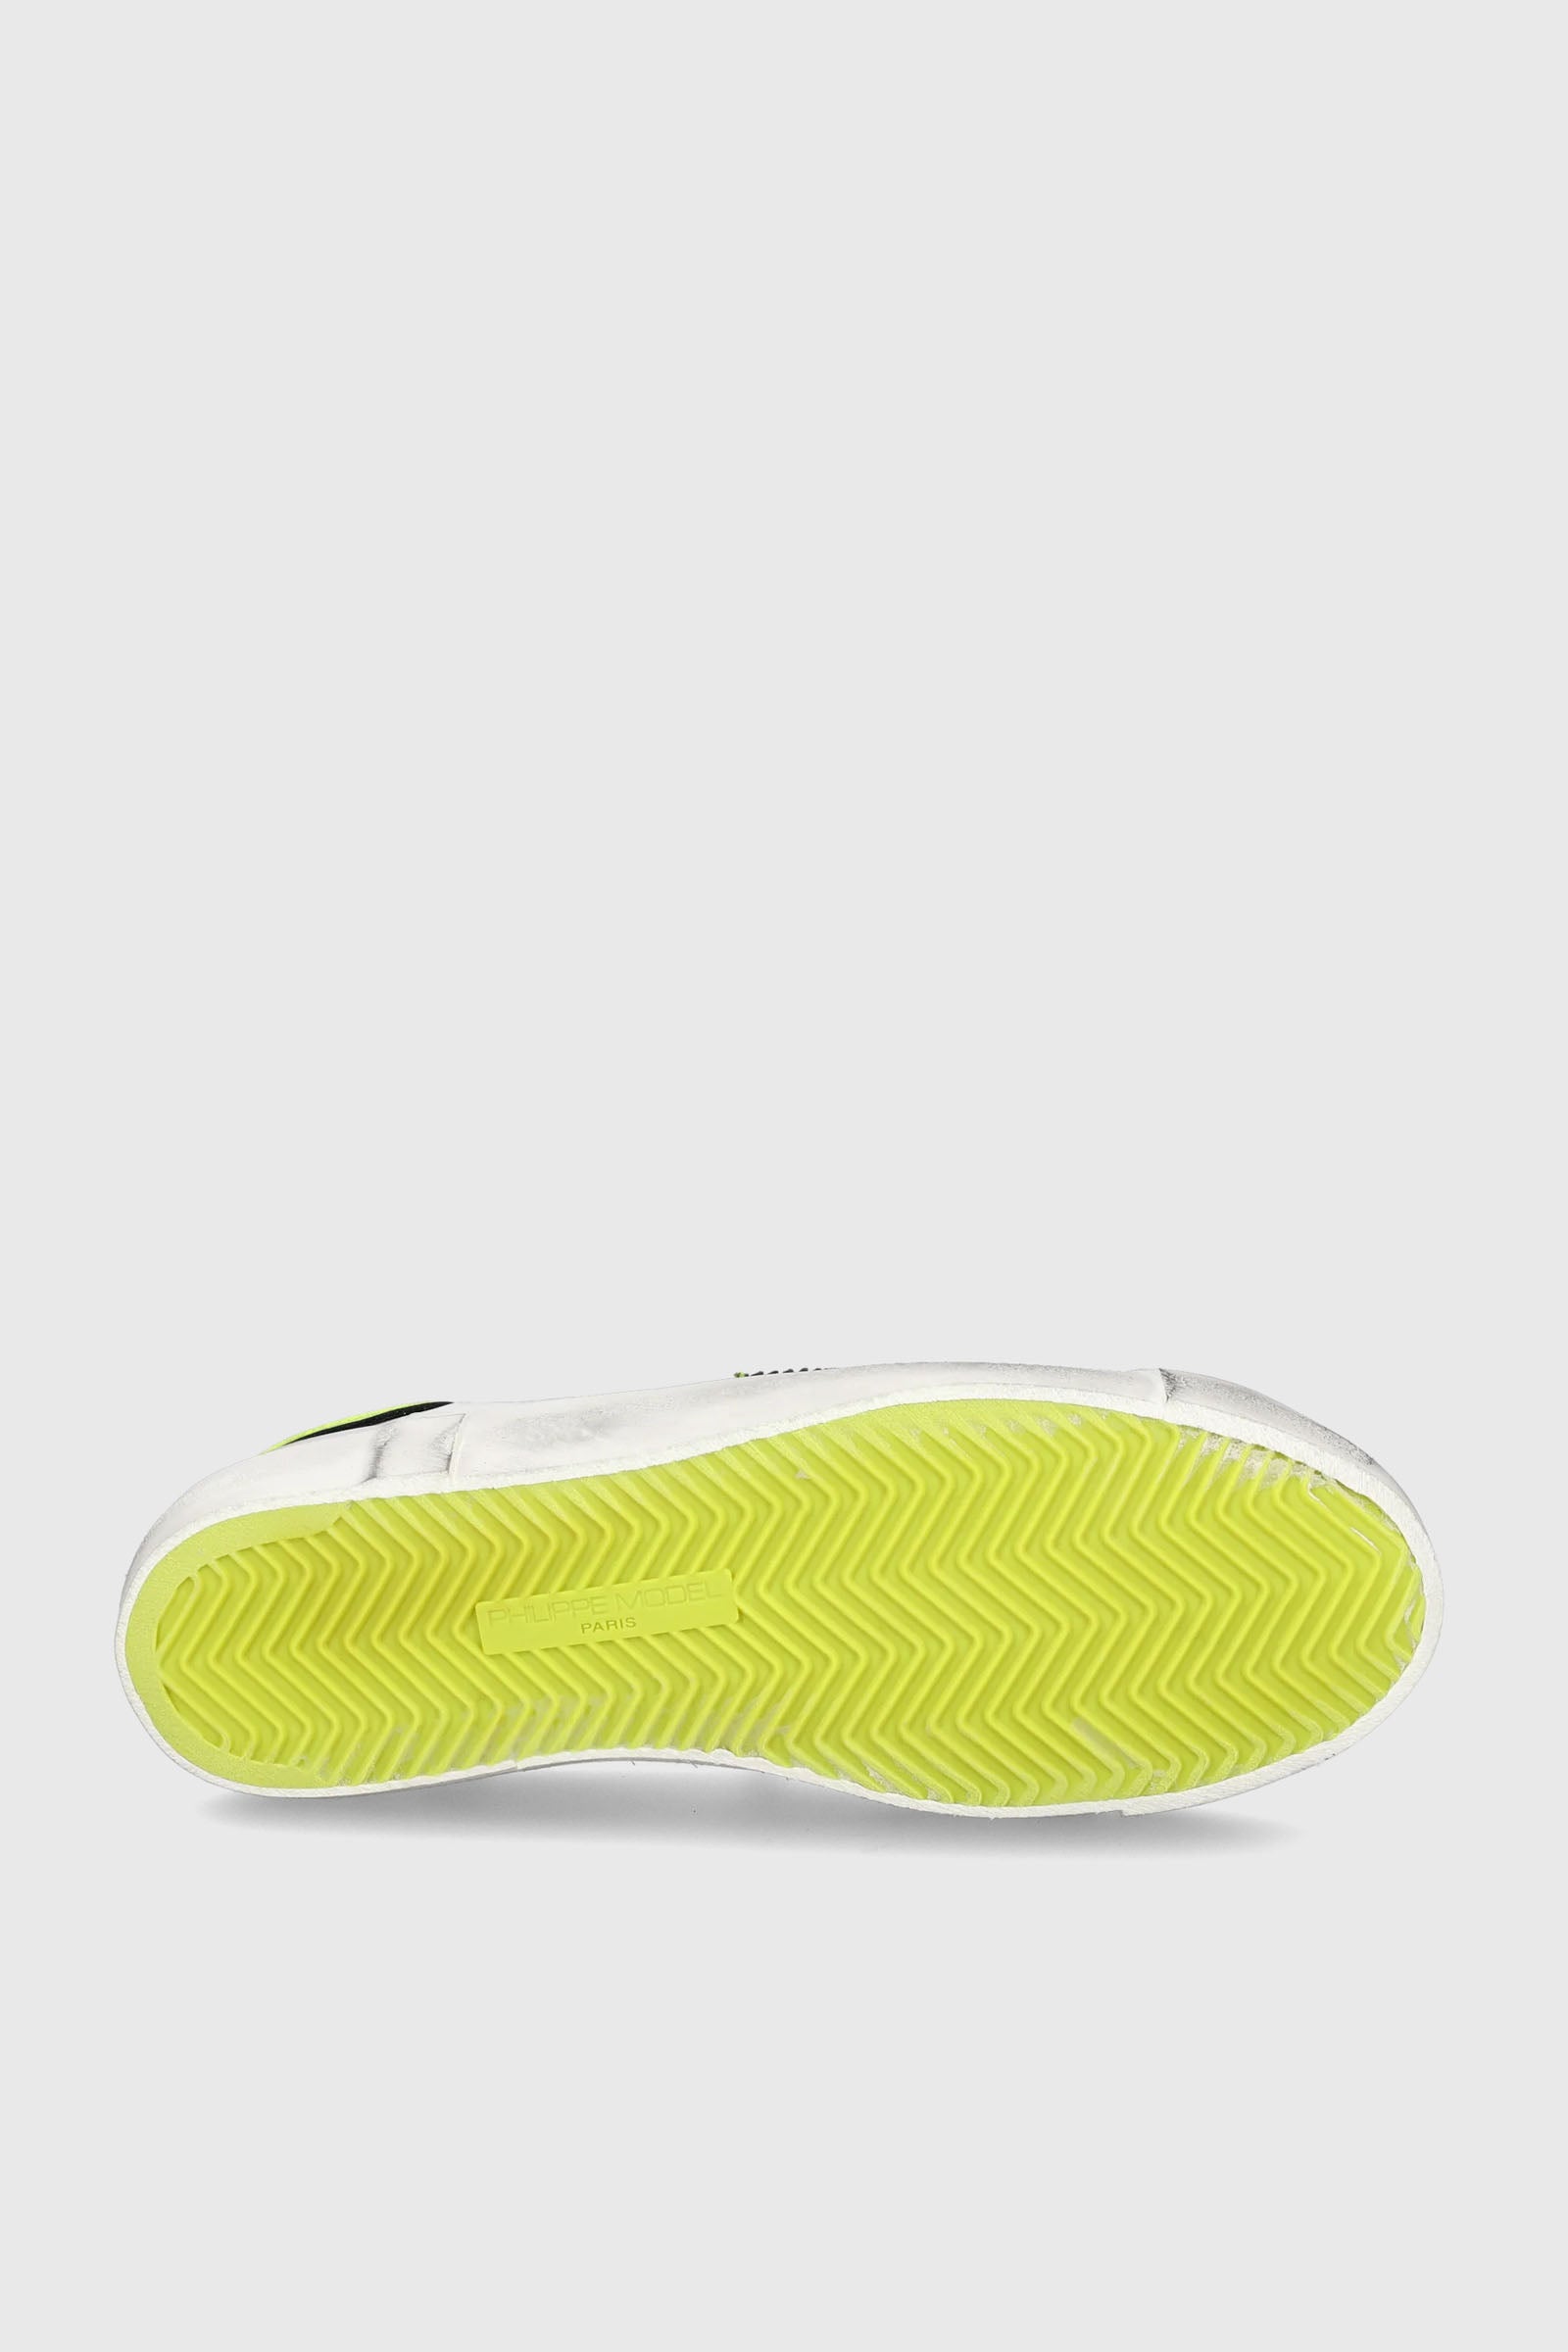 Philippe Model Sneakers PRSX Veau Broderie Leather White/Yellow Fluo - 6